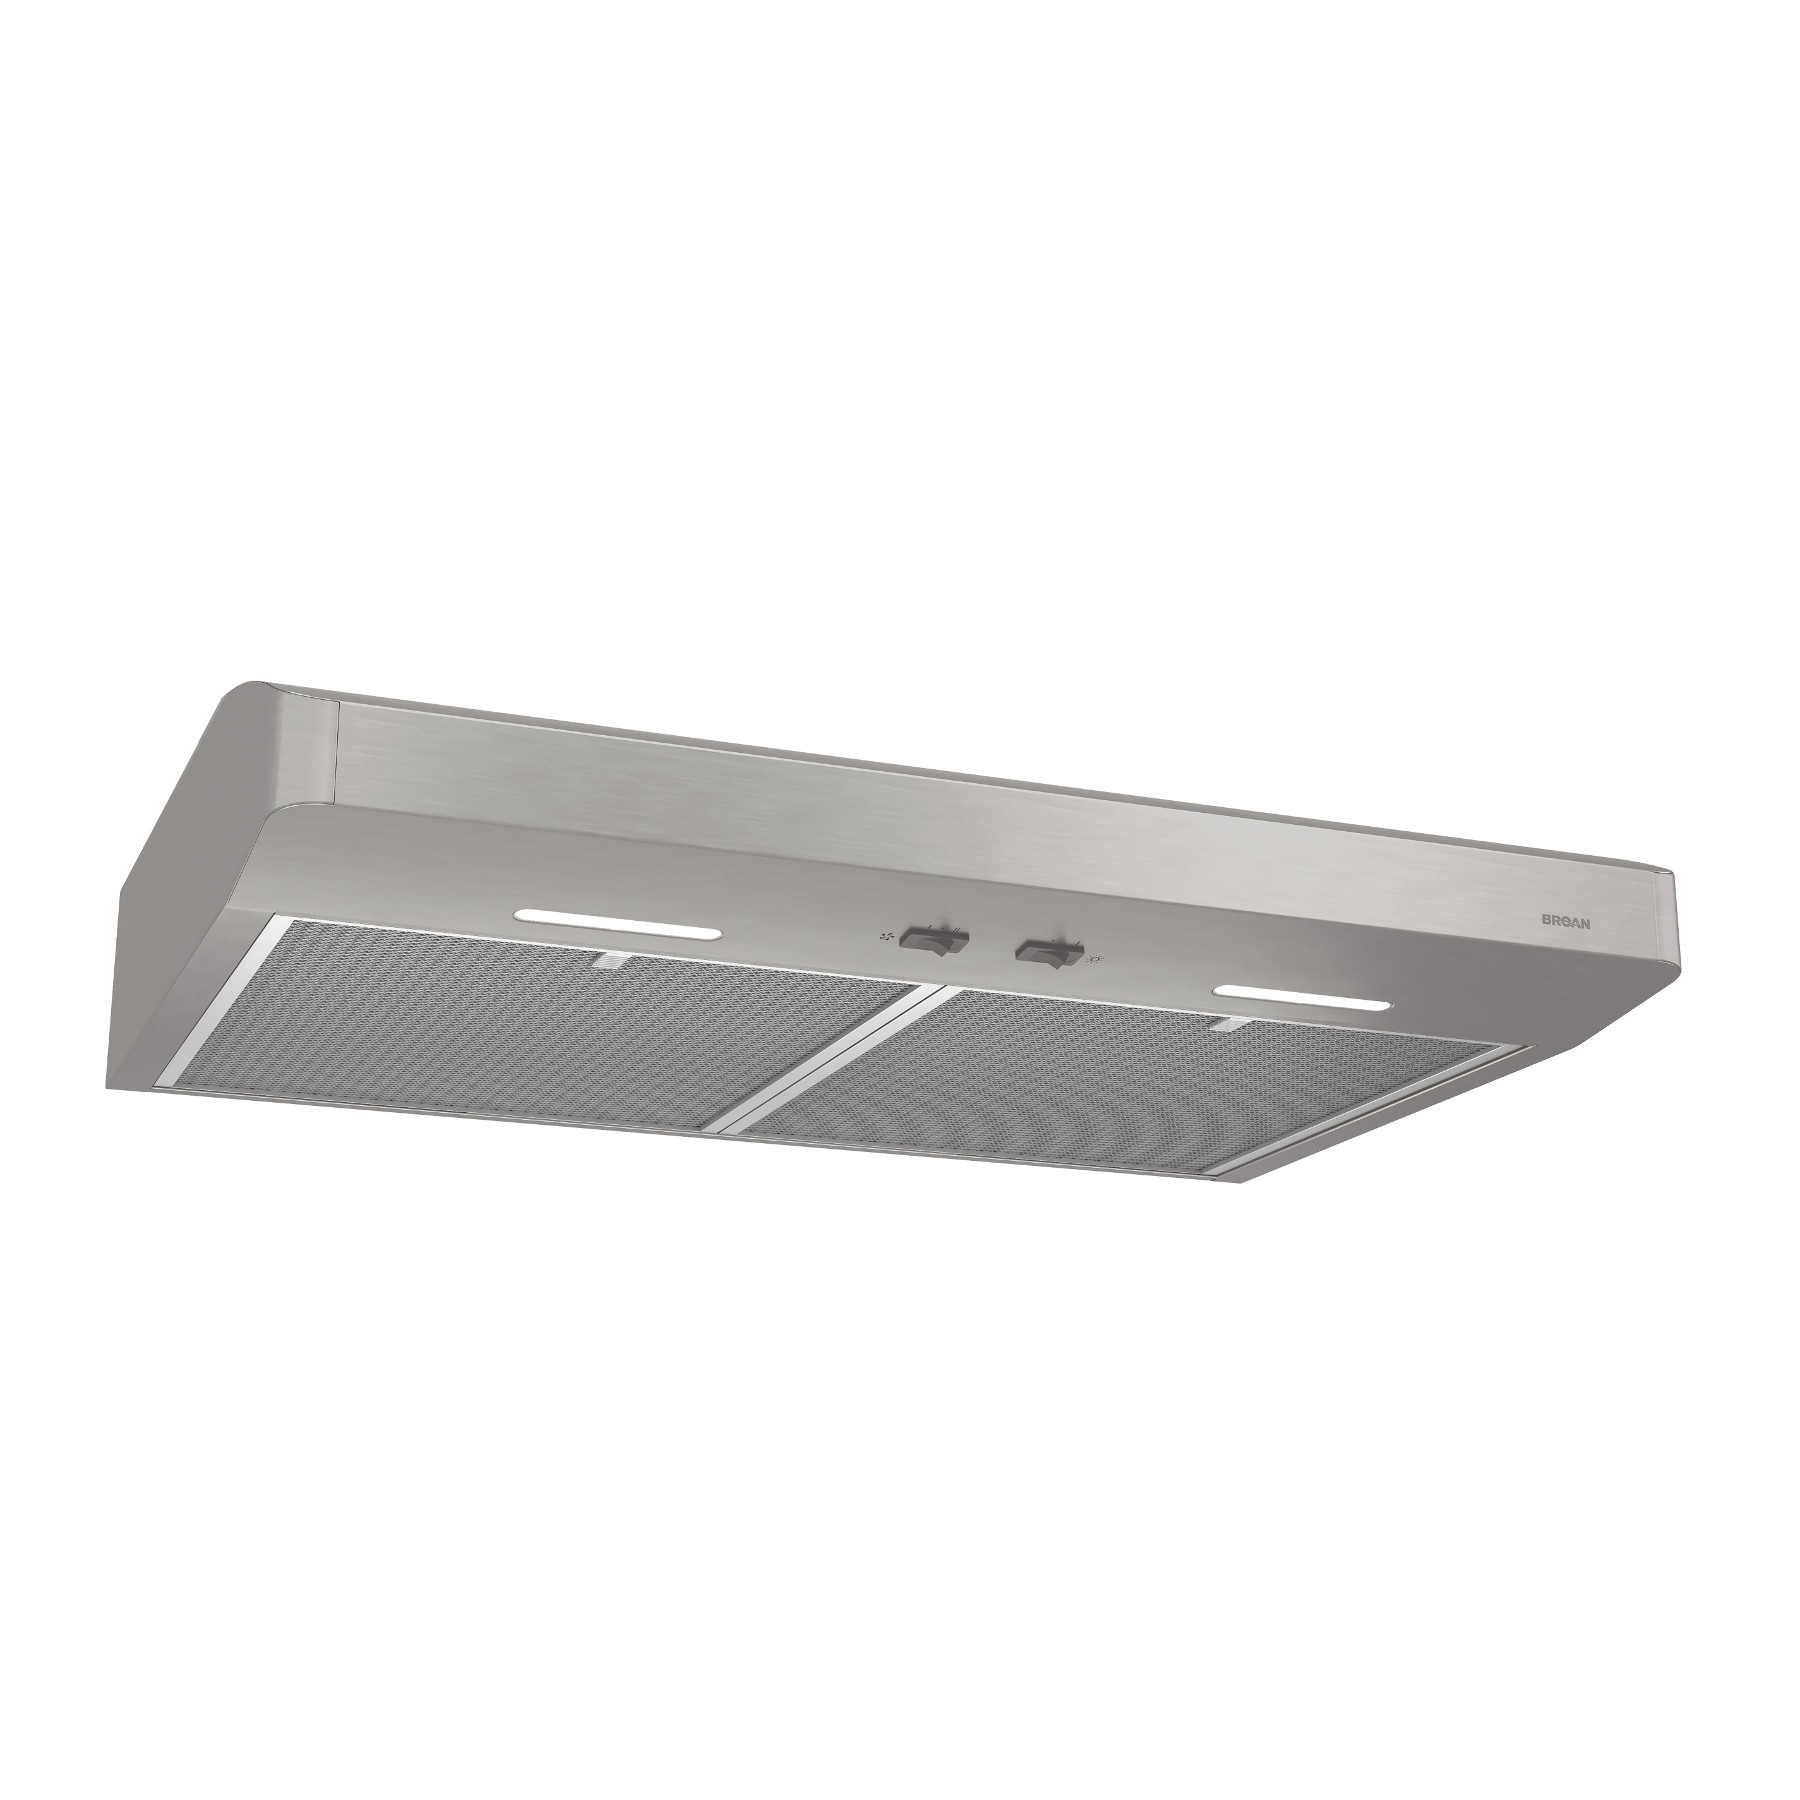 **DISCONTINUED** Broan® Corteo 30-Inch Convertible Under-Cabinet Range Hood, 300 Max Blower CFM, Stainless Steel